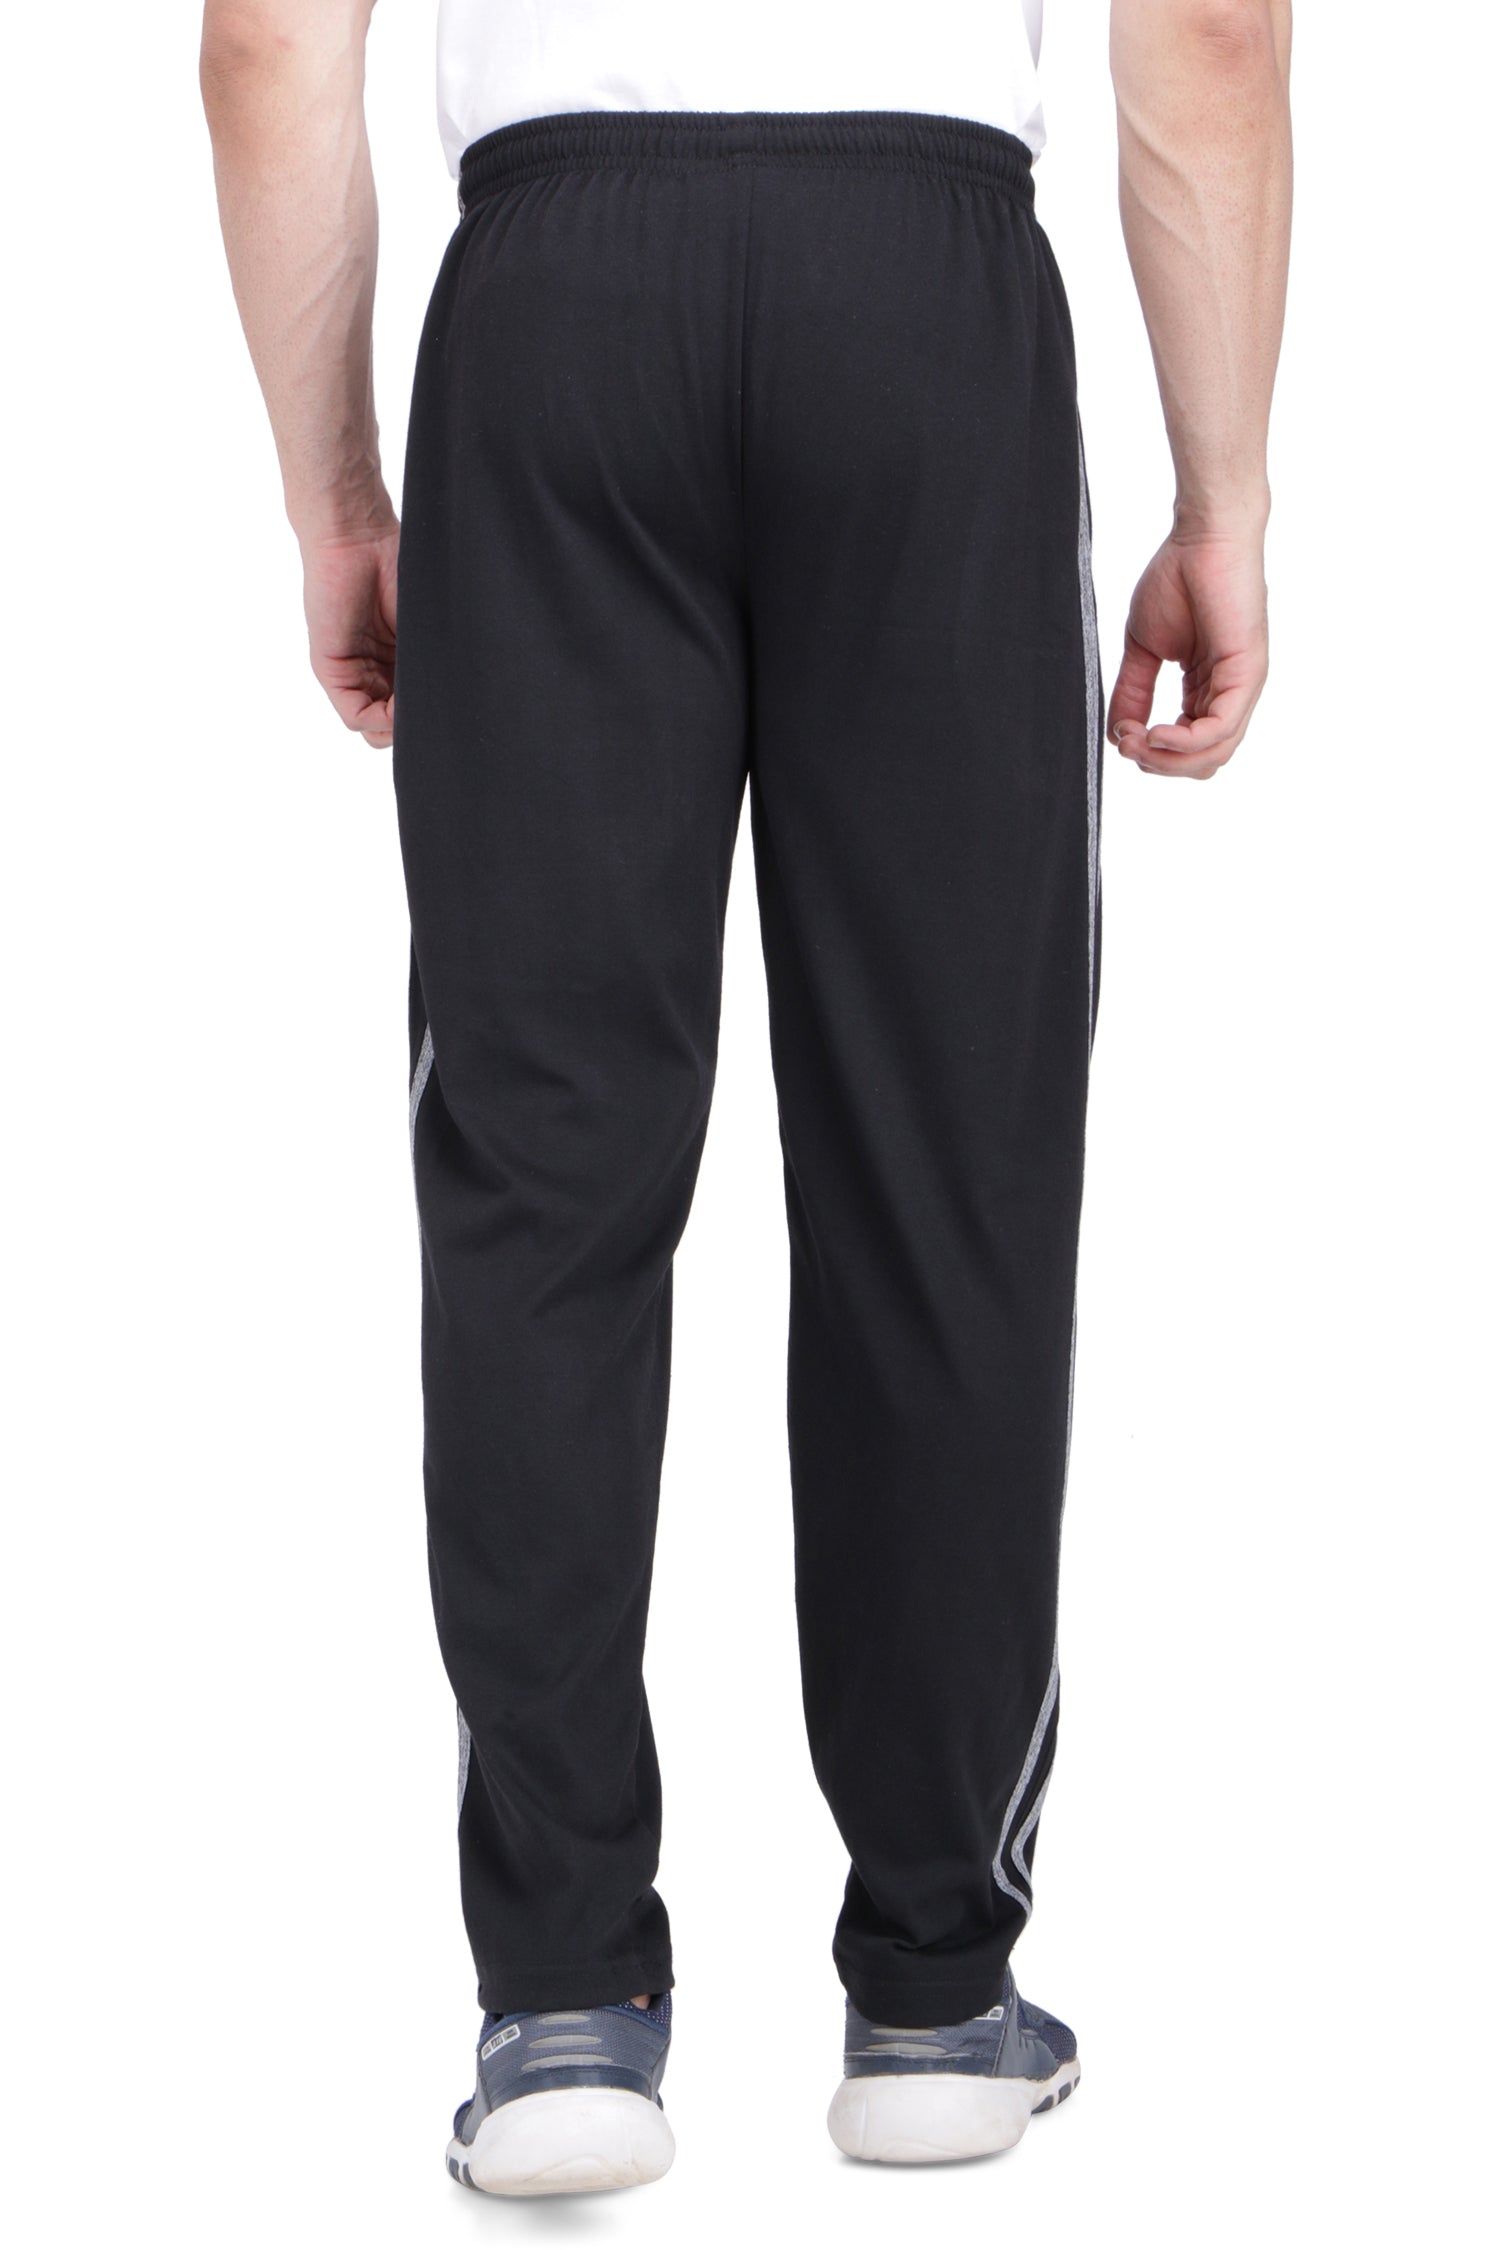 Buy Black Men Striped Sweatpants Online in India at Beyoung